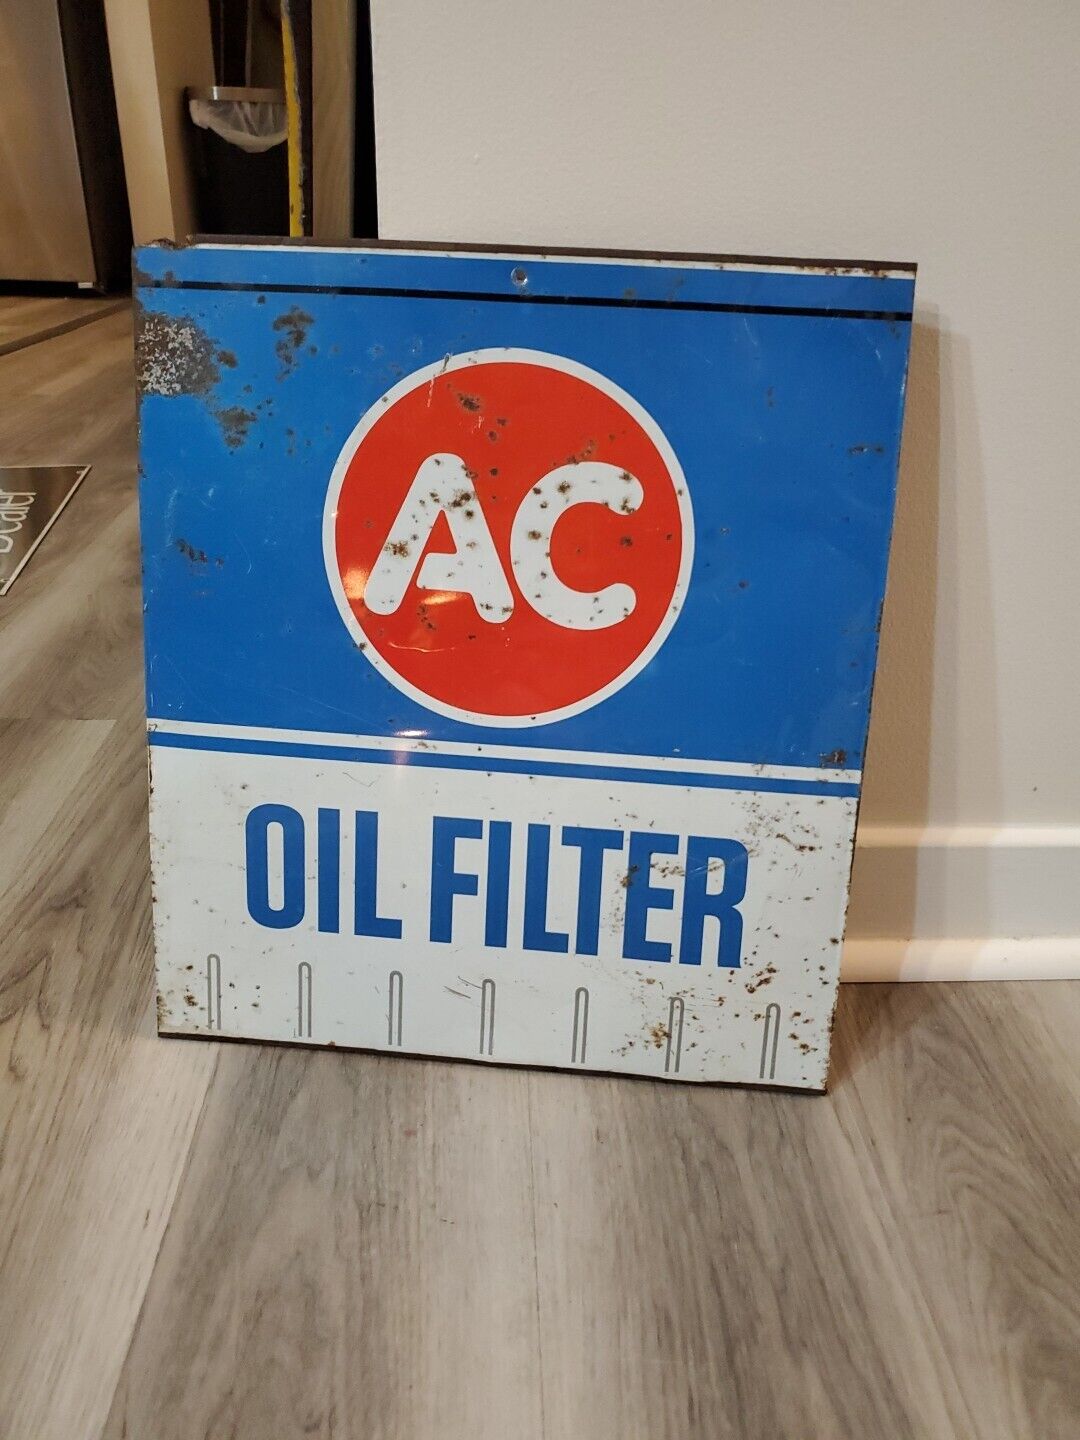 c.1964 Original Vintage AC Oil Filters Sign Metal Rack Topper GM Chevy Delco Gas